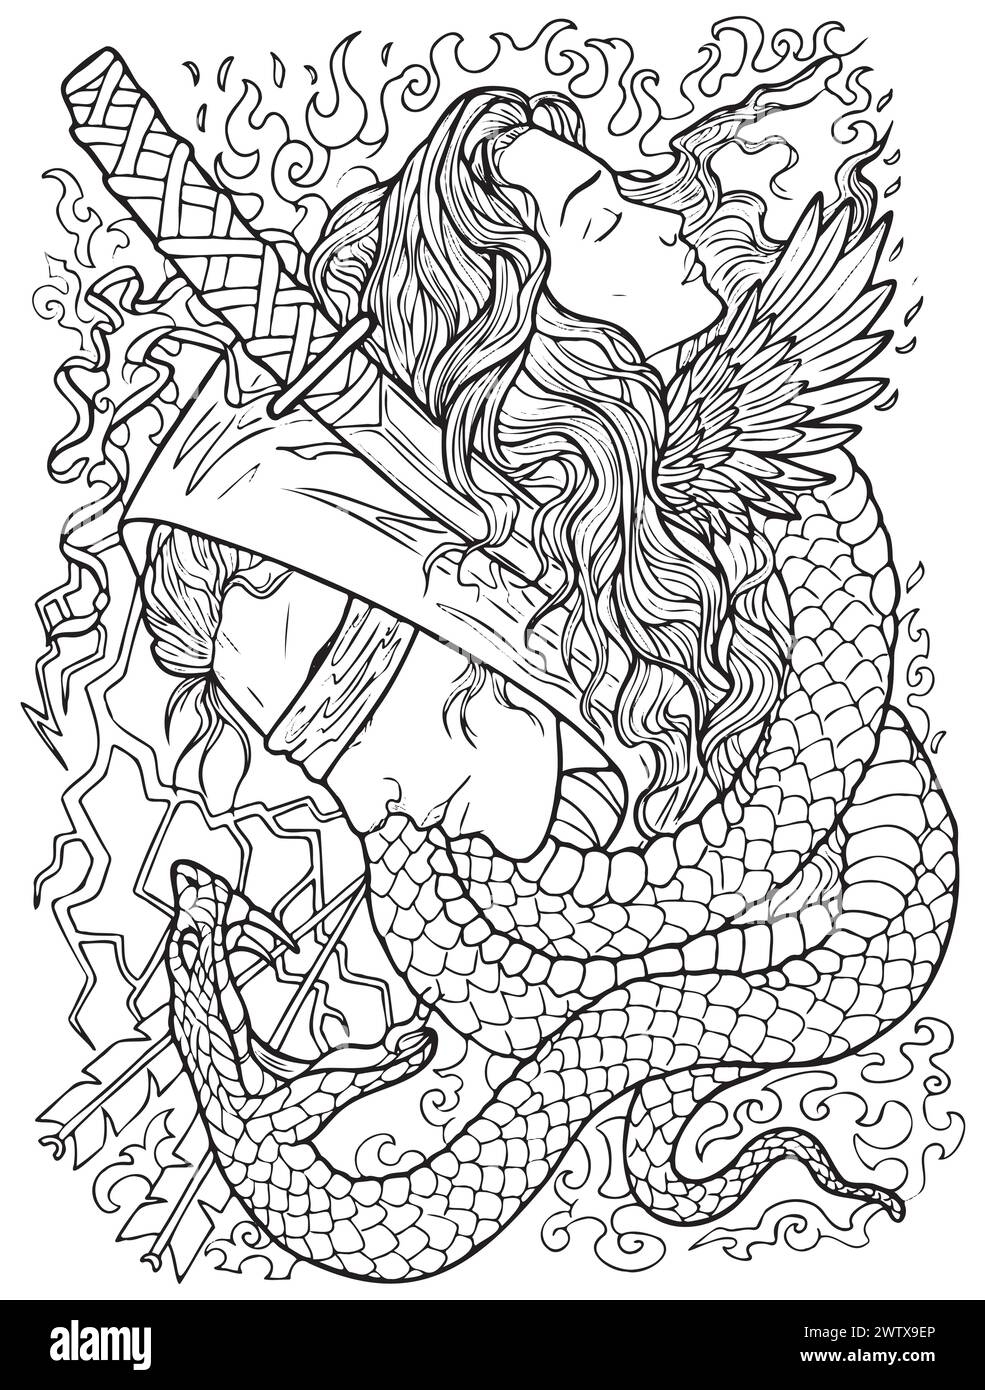 Fantasy engraved hand drawn illustration with beautiful woman, blind warrior, sword and snake. Black and white vector graphic art Stock Vector